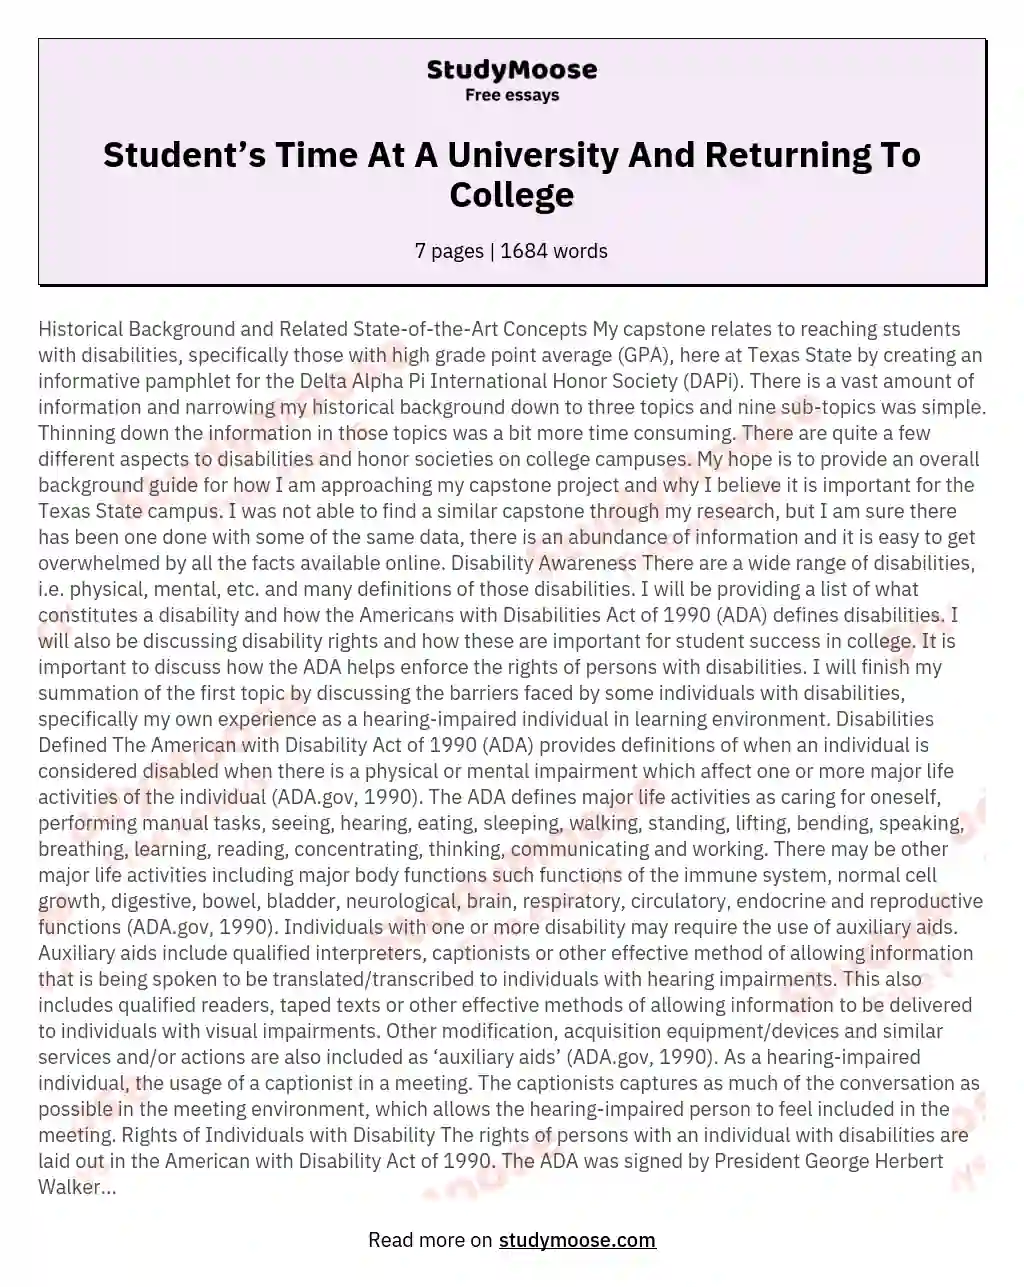 Student’s Time At A University And Returning To College essay